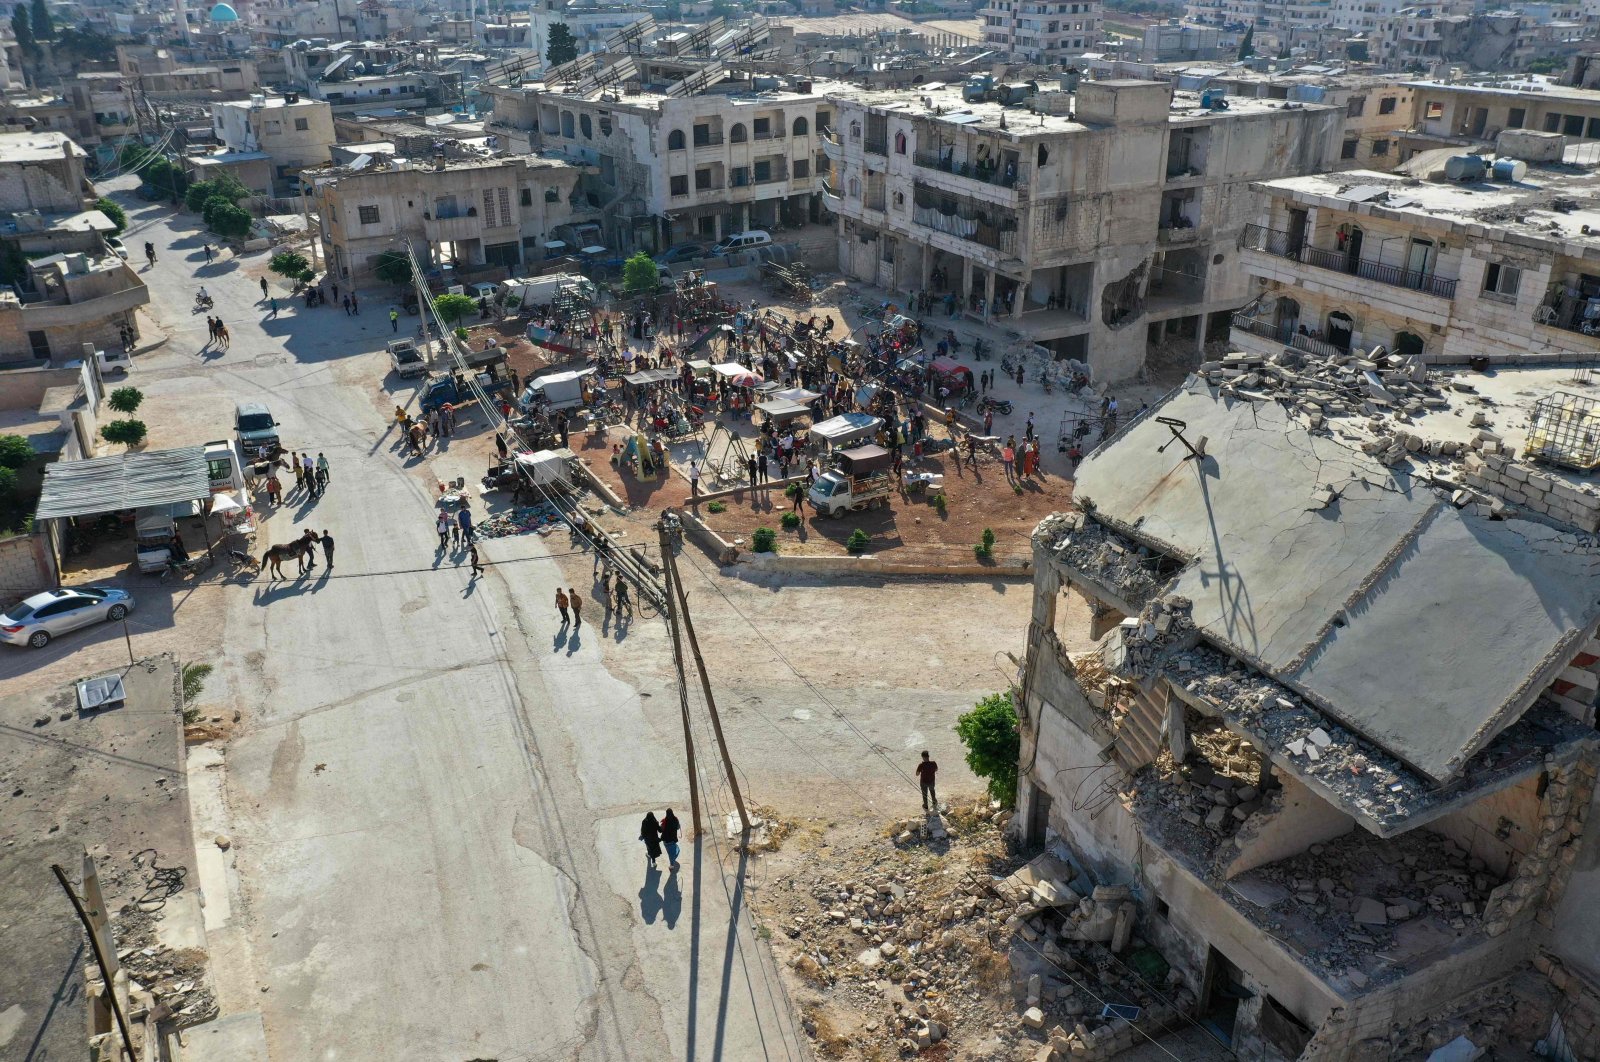 An aerial picture shows a crowd at a fair set up near damaged buildings in the Syrian town of Binnish in the northwestern opposition-held province of Idlib, Syria, July 9, 2022. (AFP Photo)